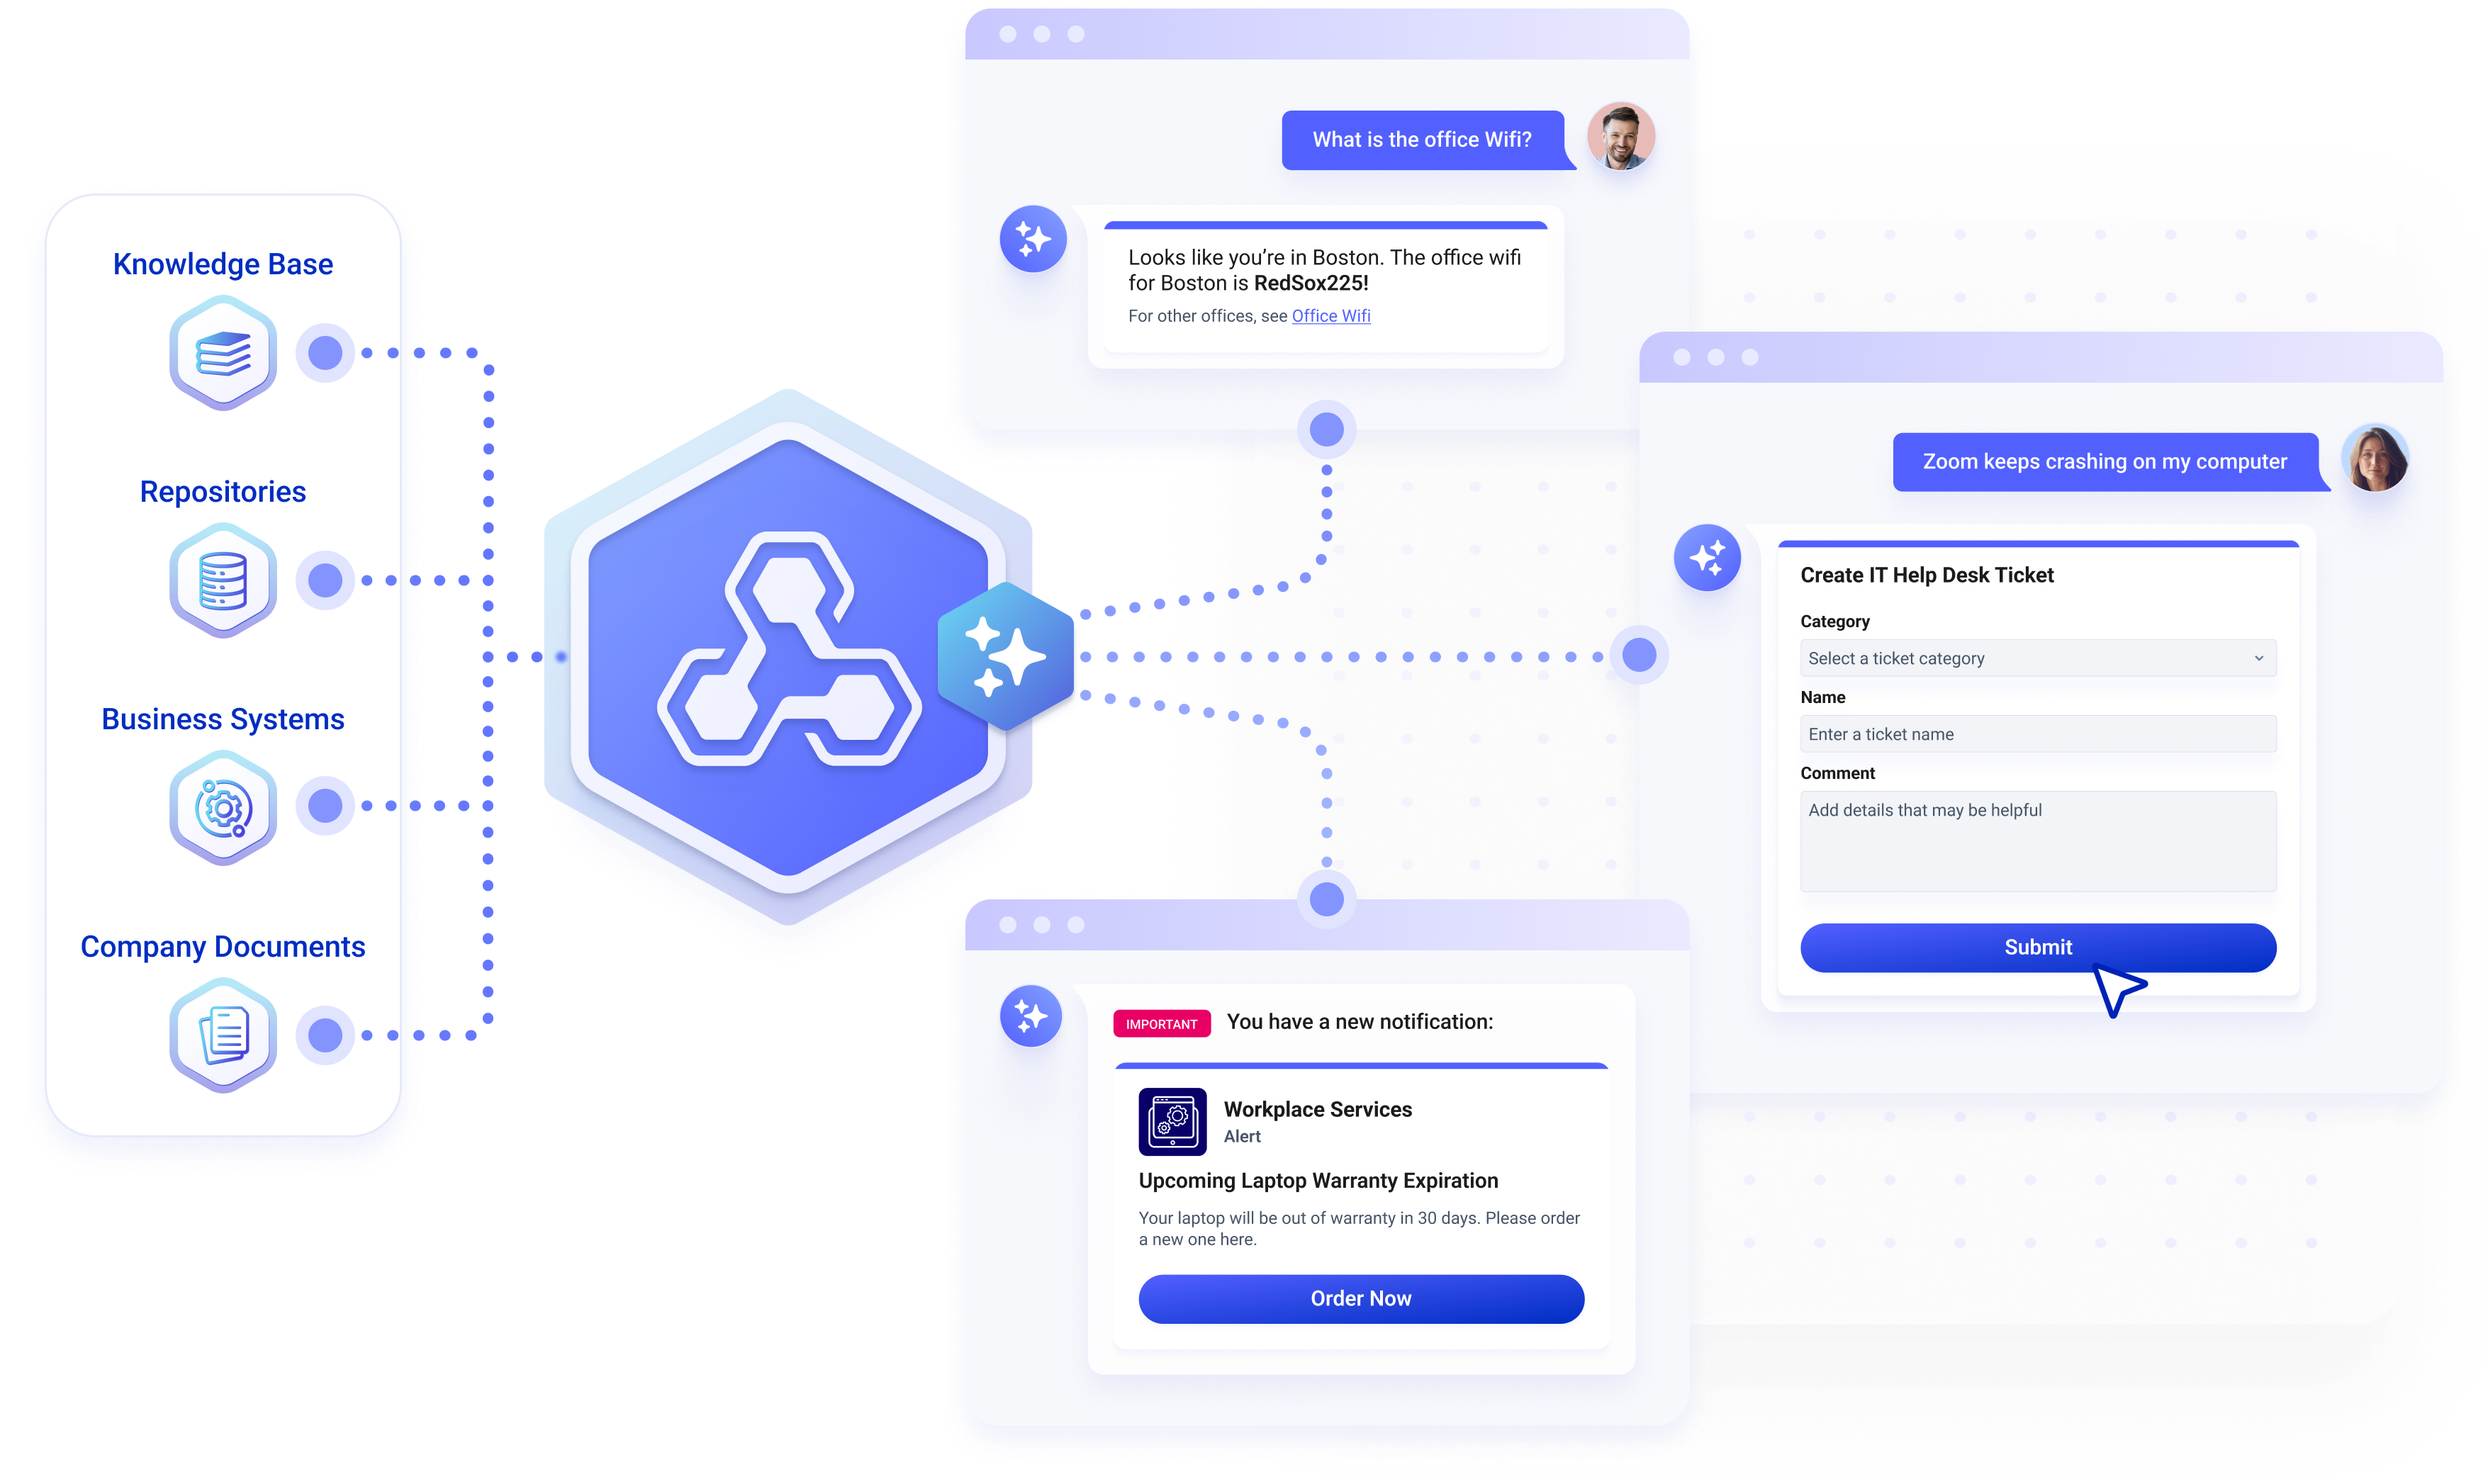 Automate support and effortlessly scale IT operations while unburdening your helpdesk with Workgrid's conversational AI assistant.